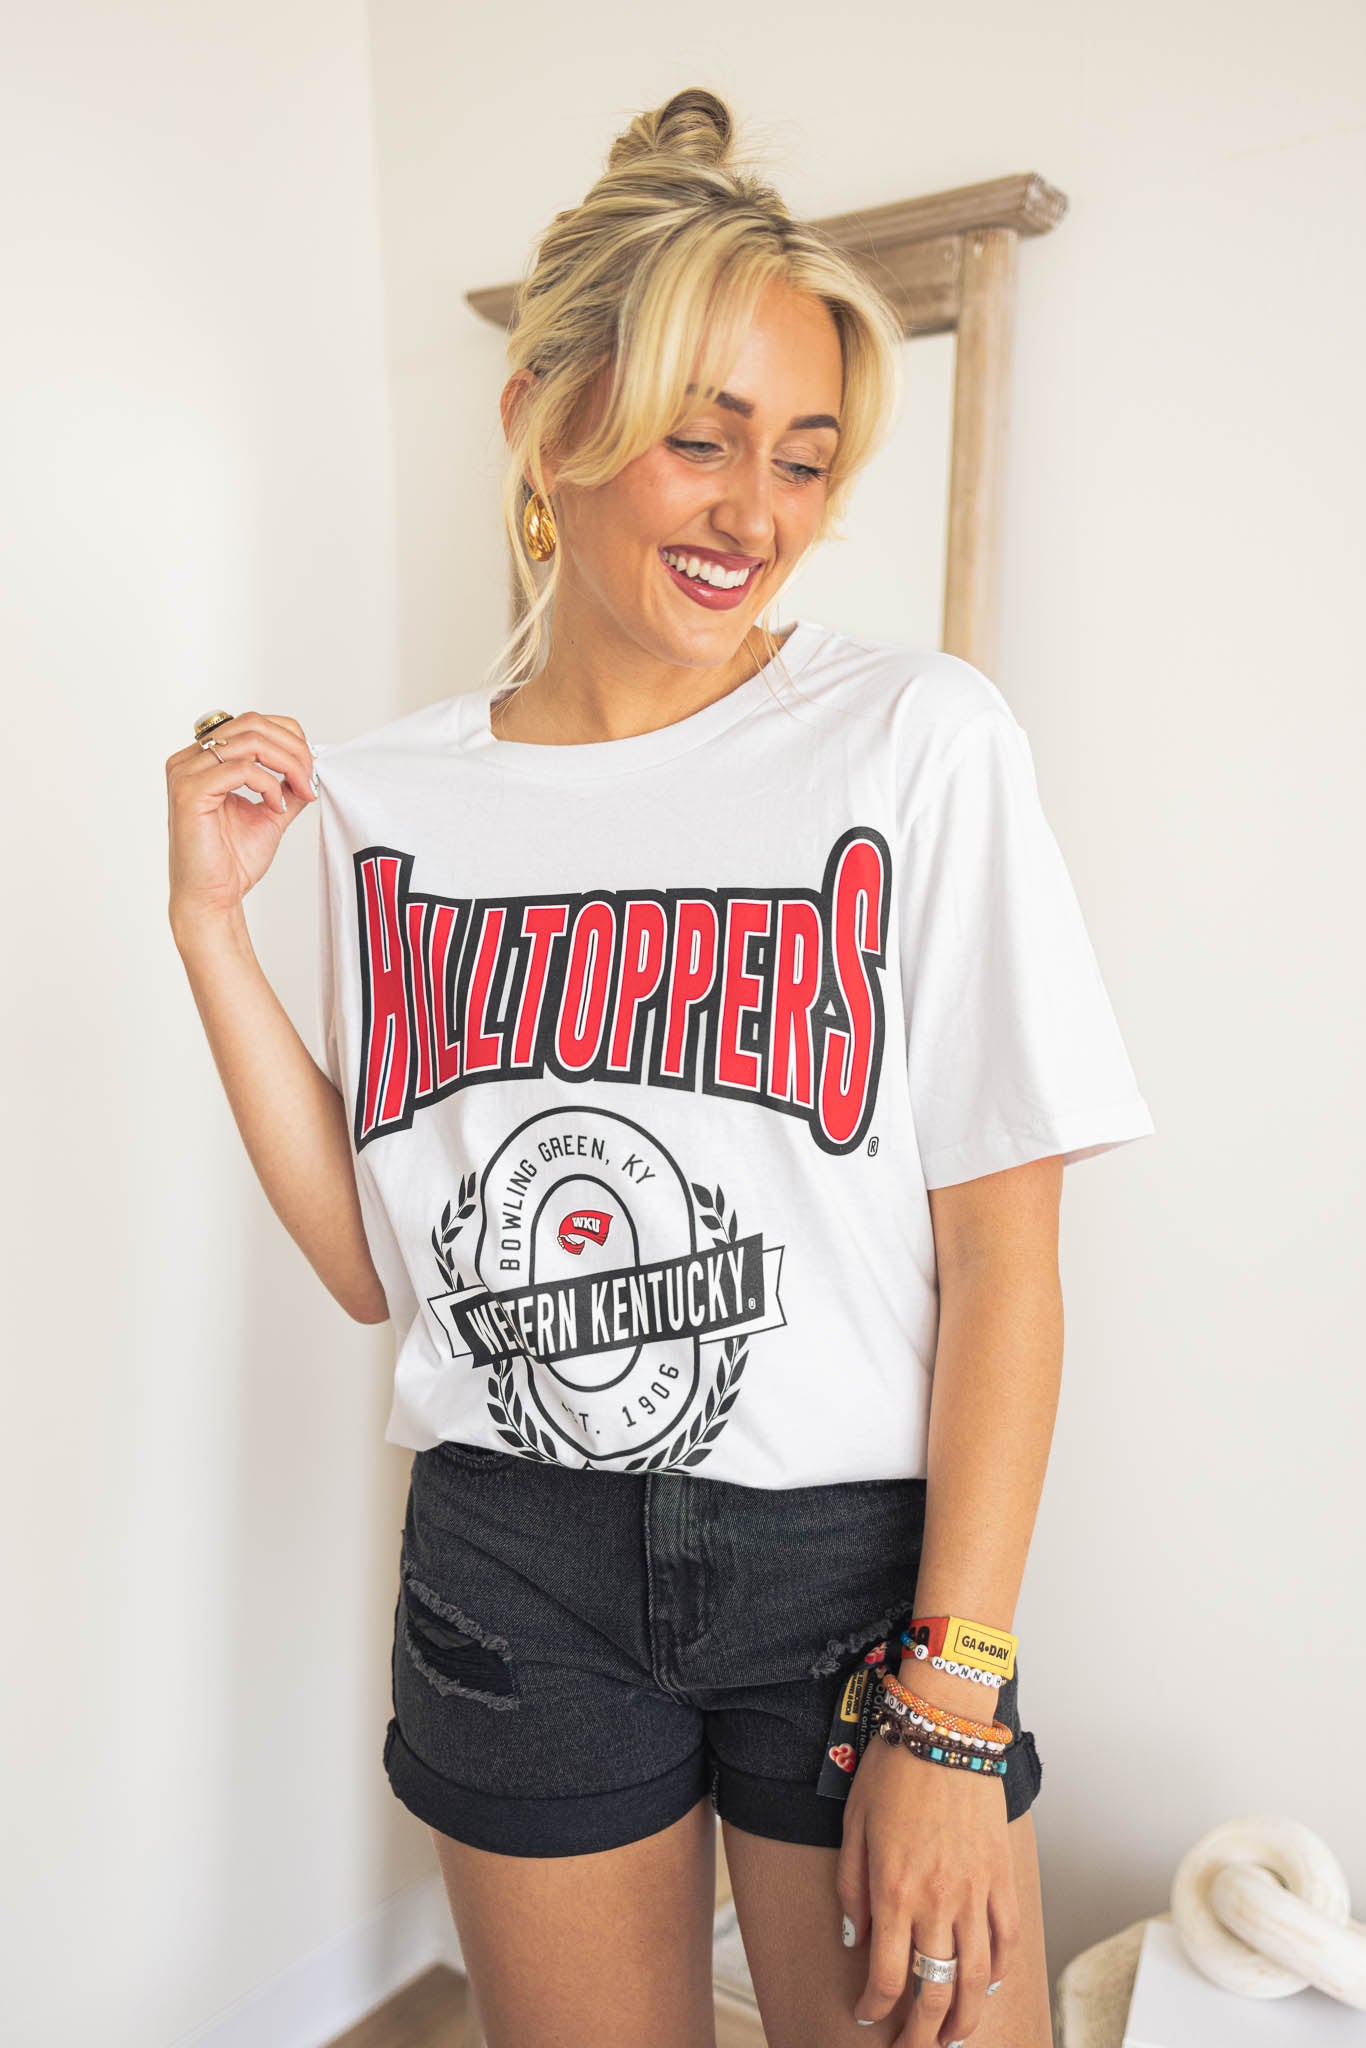 The Classic Topper Tee